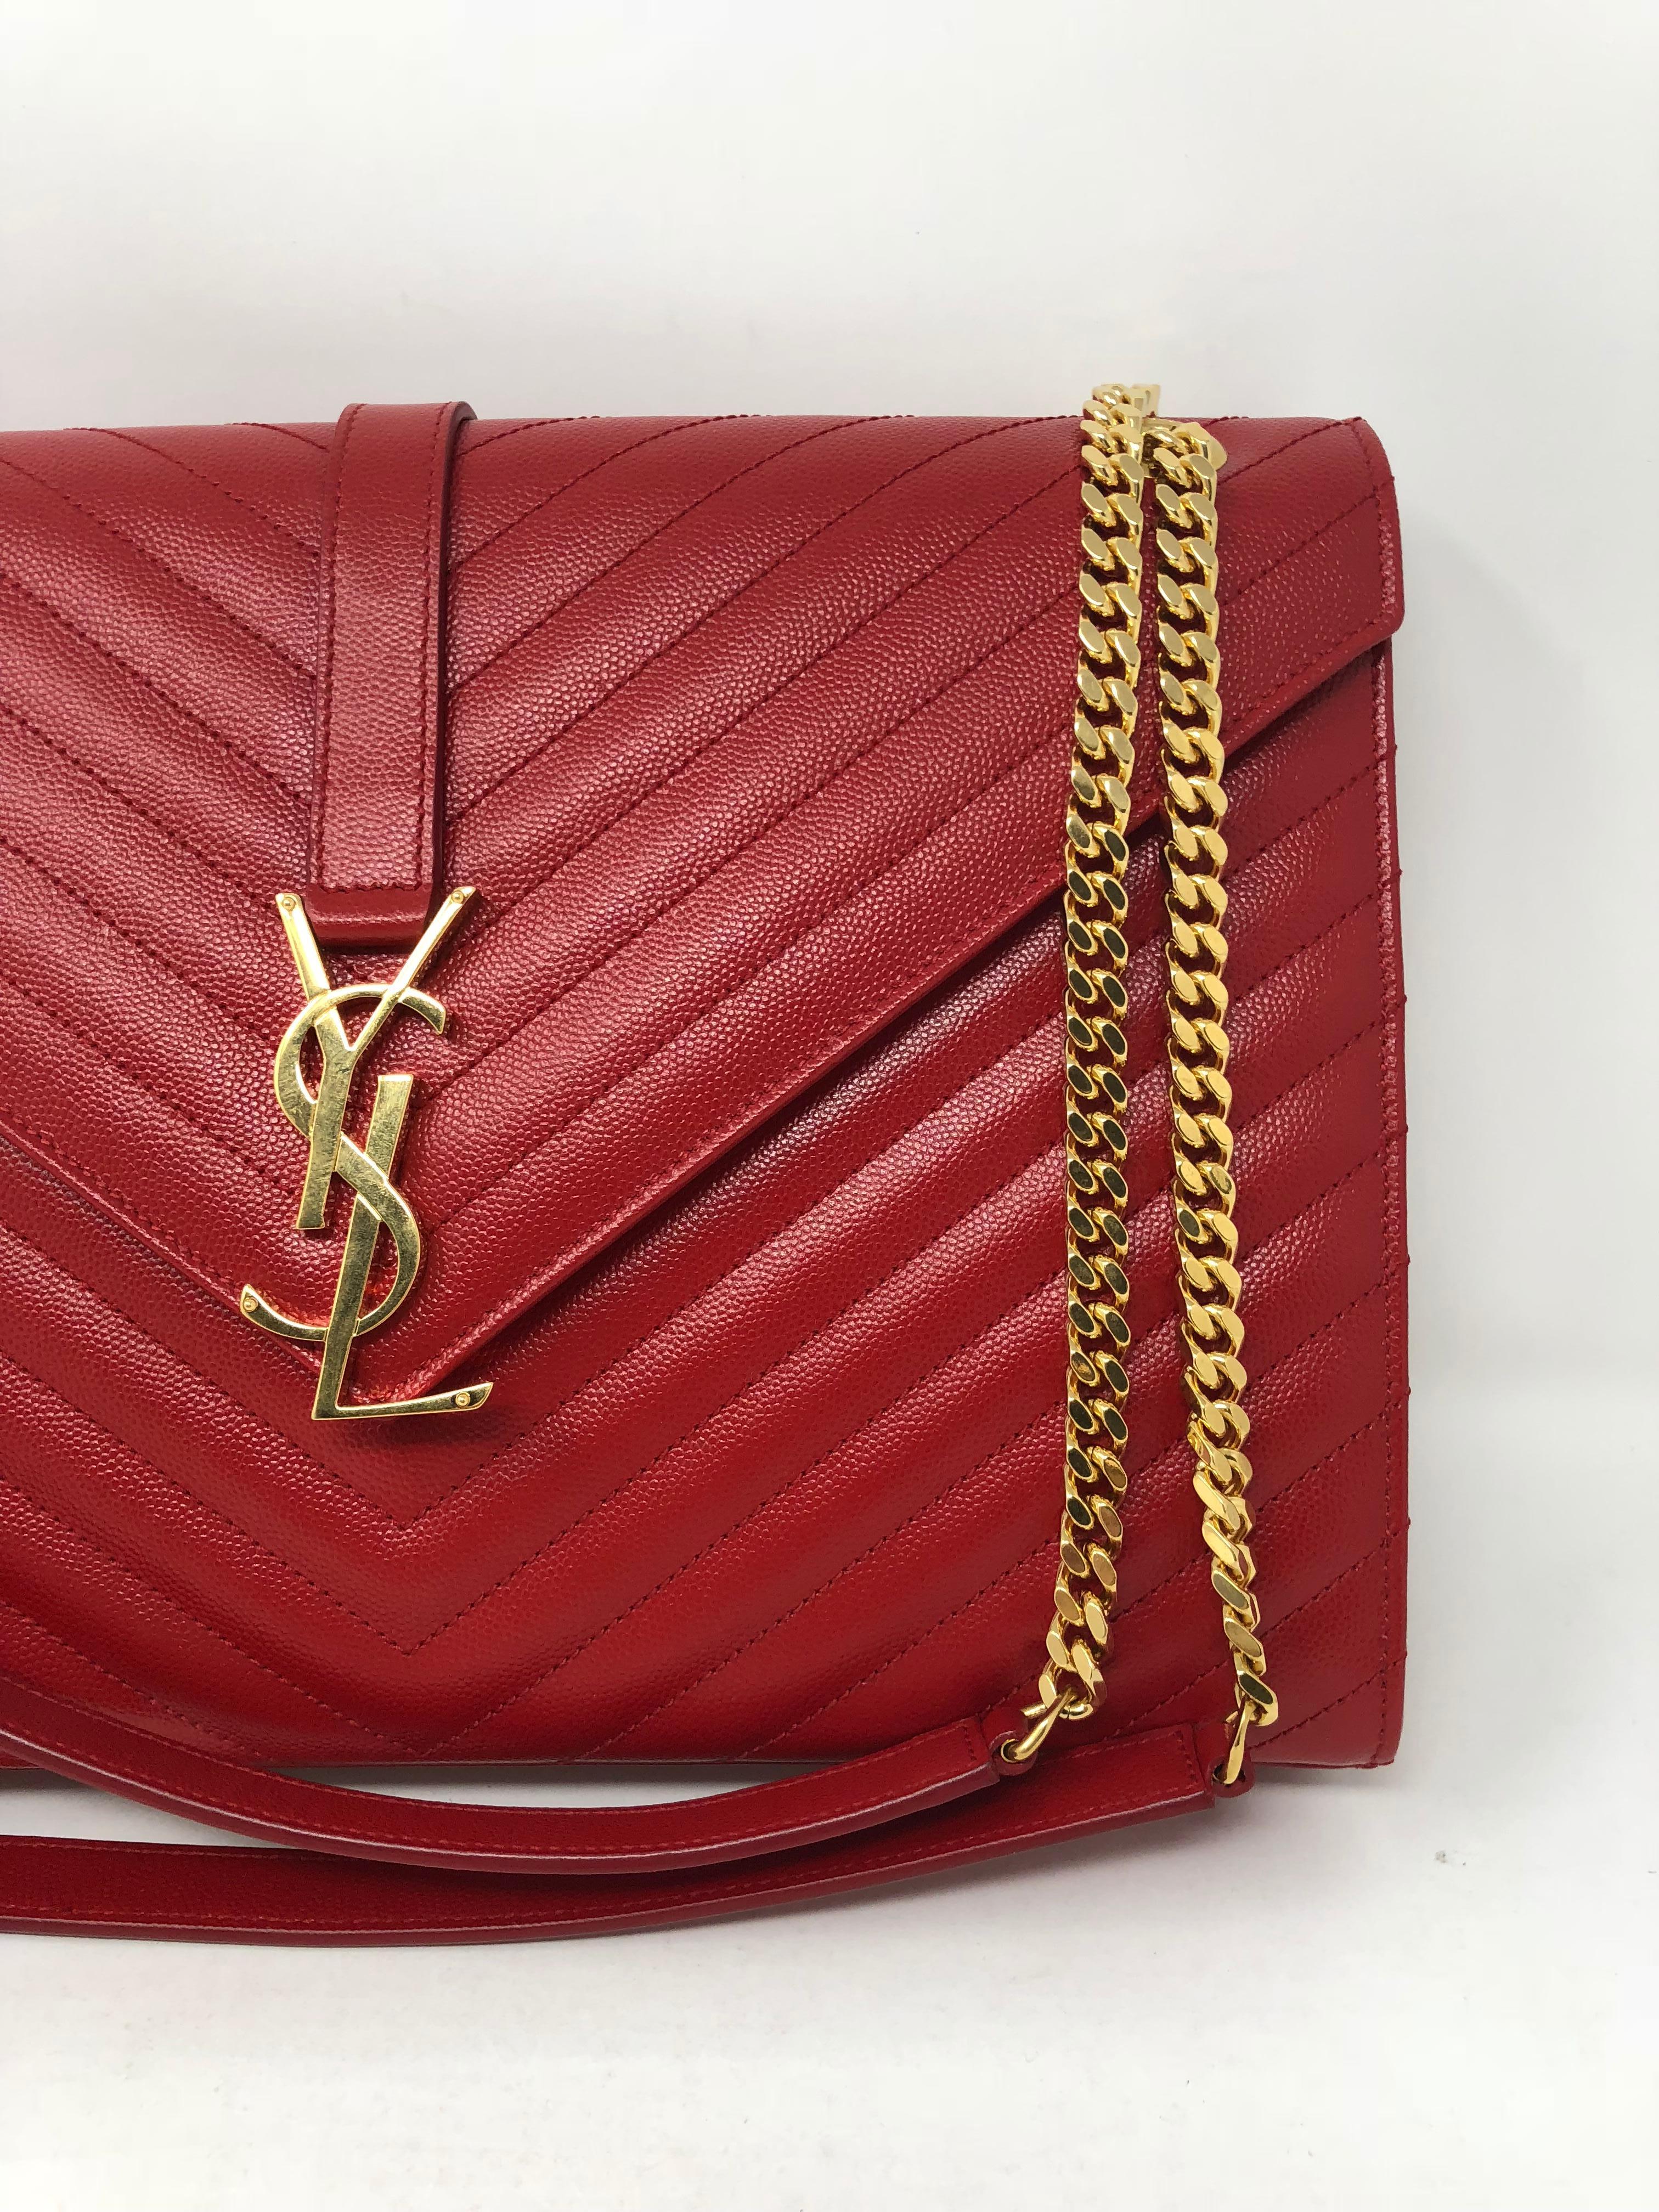 YSL Red Leather Handbag with 2 way handles in gold hardware. Large Monogram Matelasse Leather Chain Shoulder Bag. Discontinued Red Color. Brand New Condition. Never worn. Envelope Flap in Chevron leather with magnetic snap close and YSL logo.